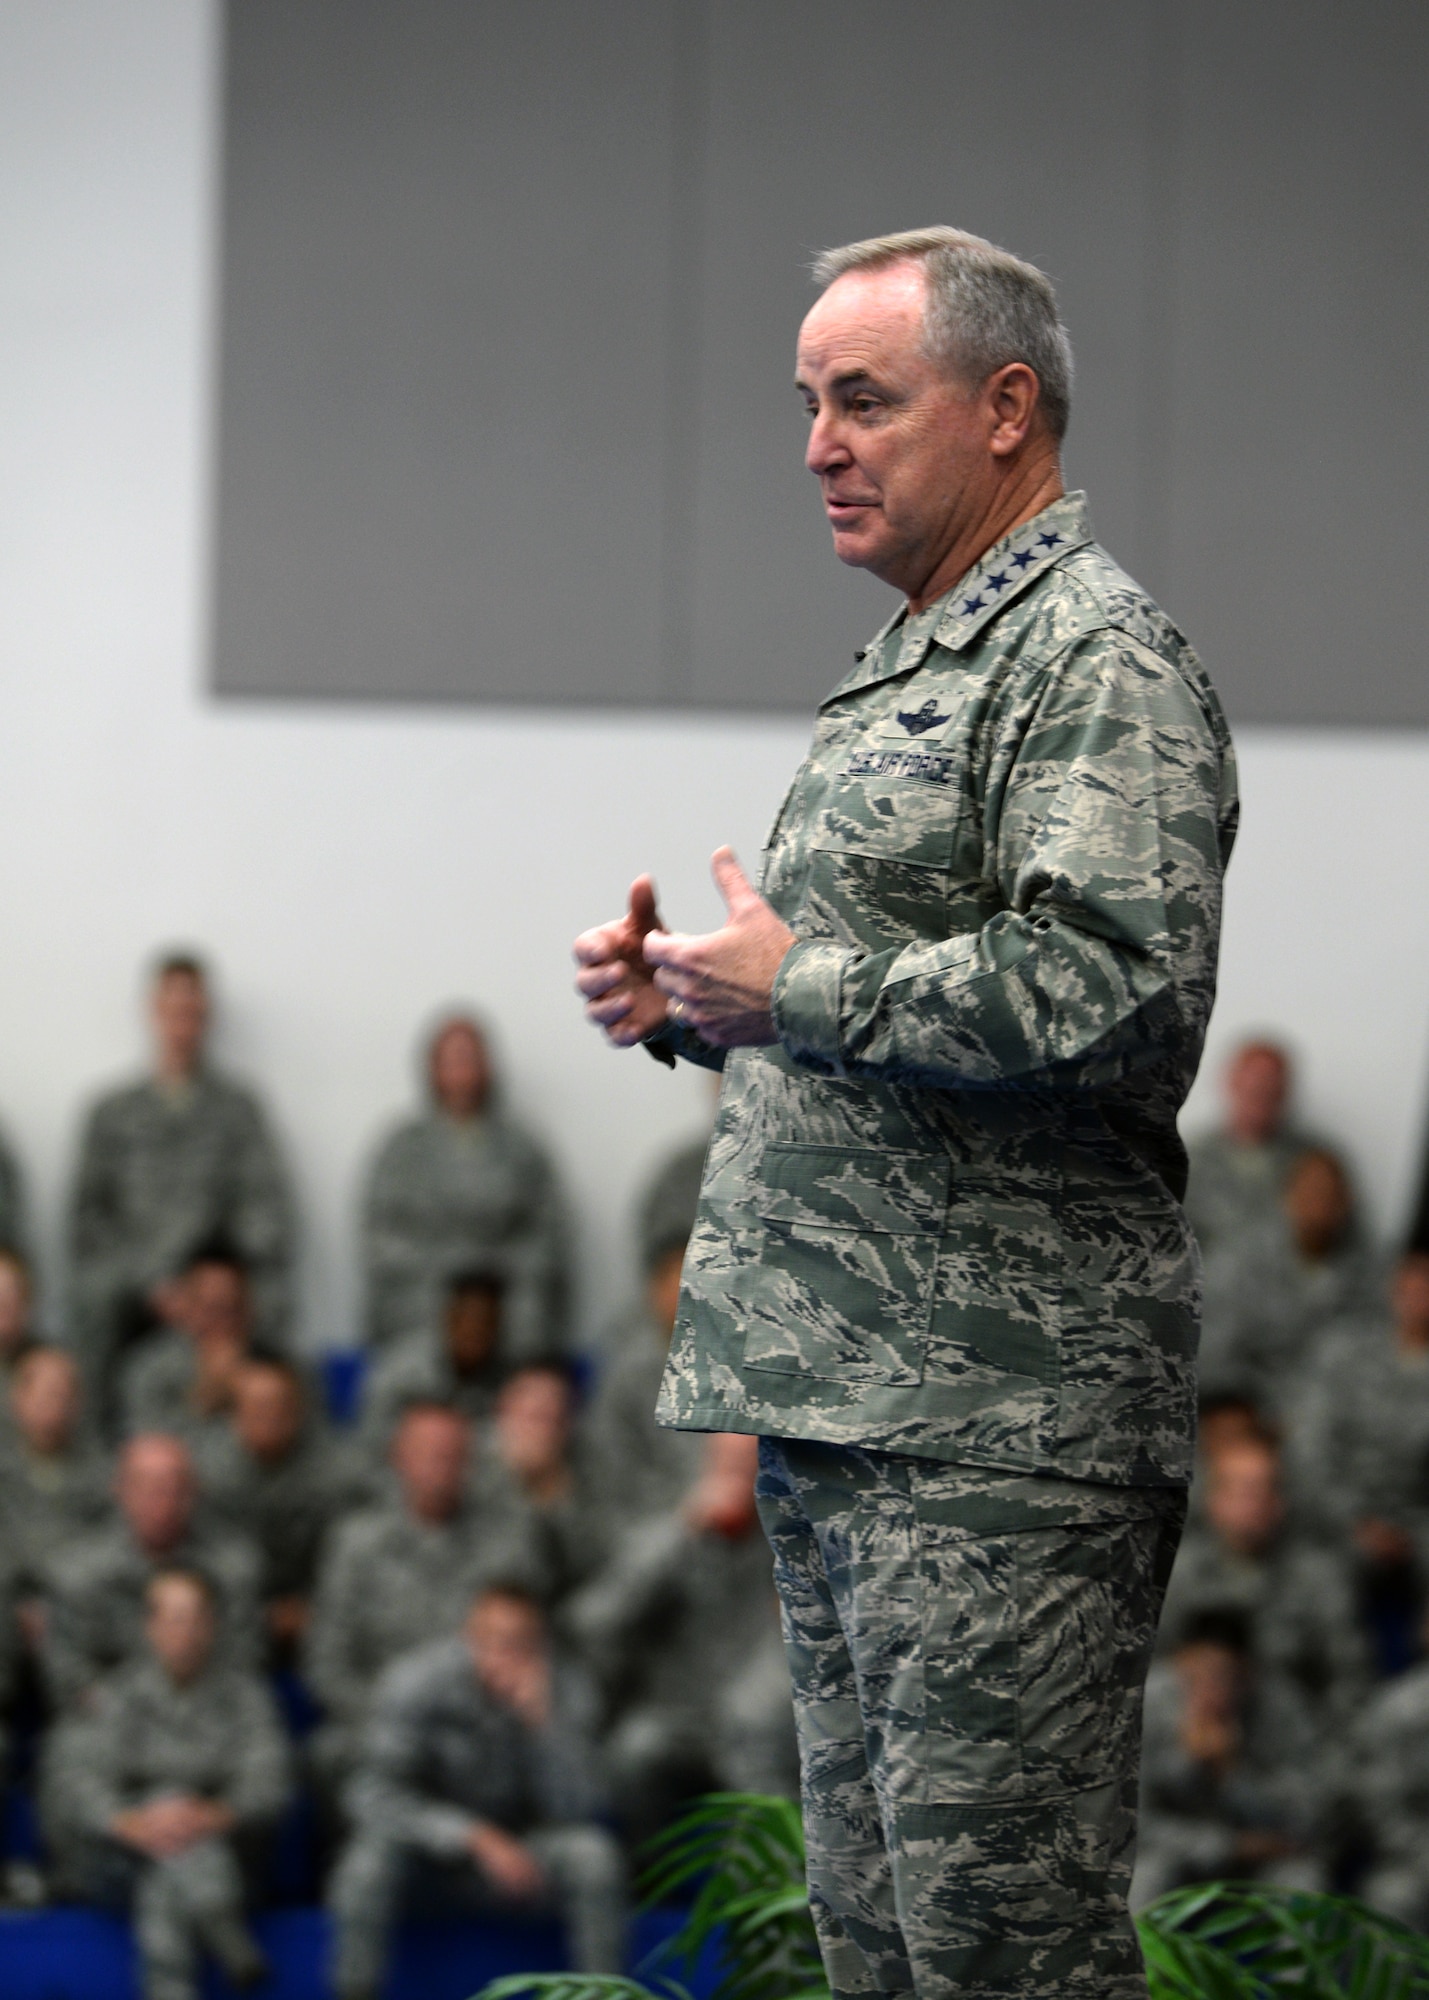 Air Force Chief of Staff Gen. Mark A. Welsh III speaks at an all call during his visit Jan. 21, 2016, at Andersen Air Force Base, Guam. During the all call, Welsh discussed the strategic advantage Guam has in the Indo-Asia Pacific theater and thanked Airmen for their dedication and support. (U.S. Air Force photo/Senior Airman Cierra Presentado)